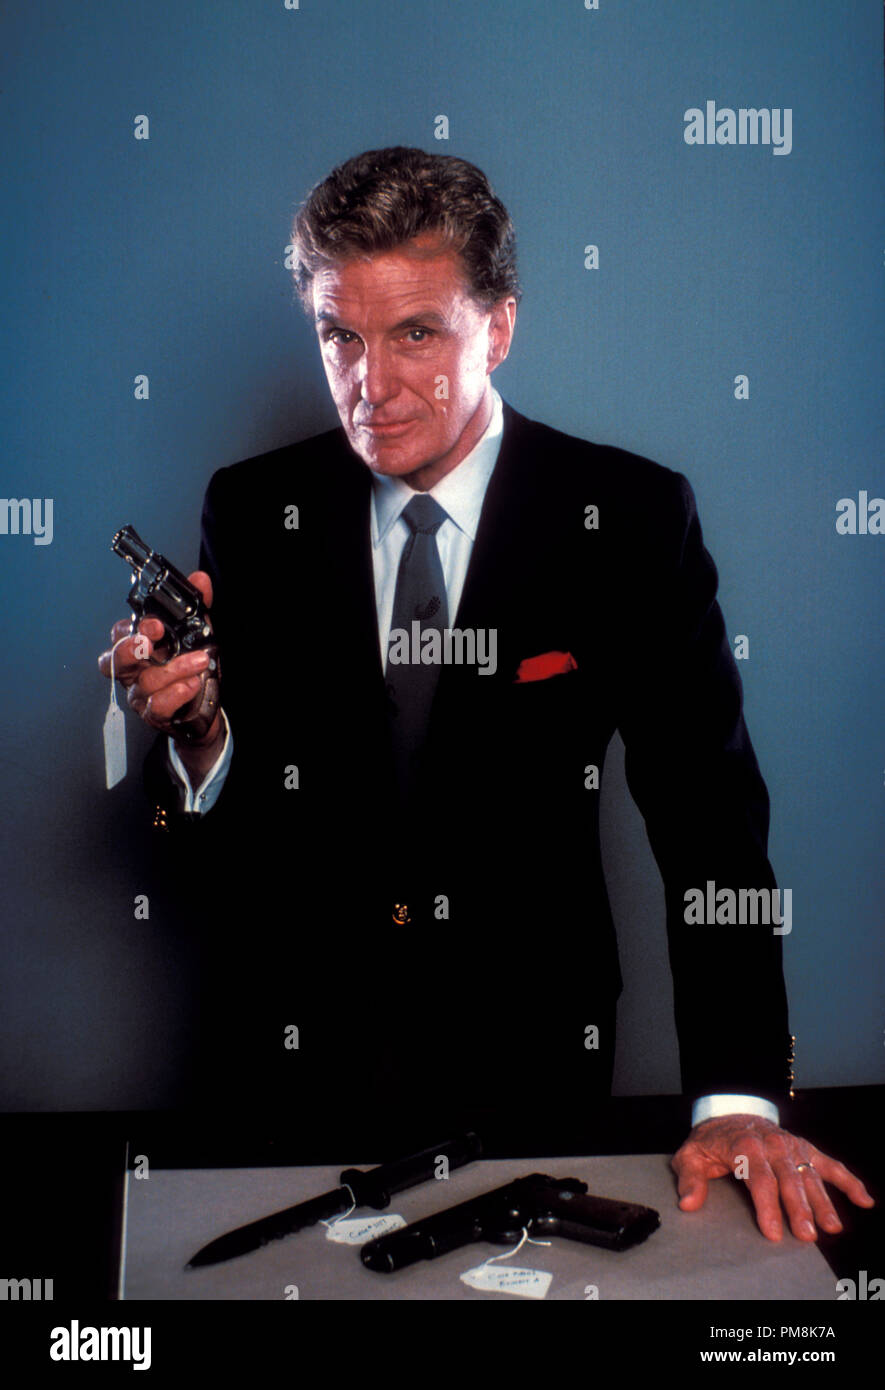 Film still or Publicity still from 'Unsolved Mysteries' Robert Stack, 1989  All Rights Reserved   File Reference # 31623022THA  For Editorial Use Only Stock Photo